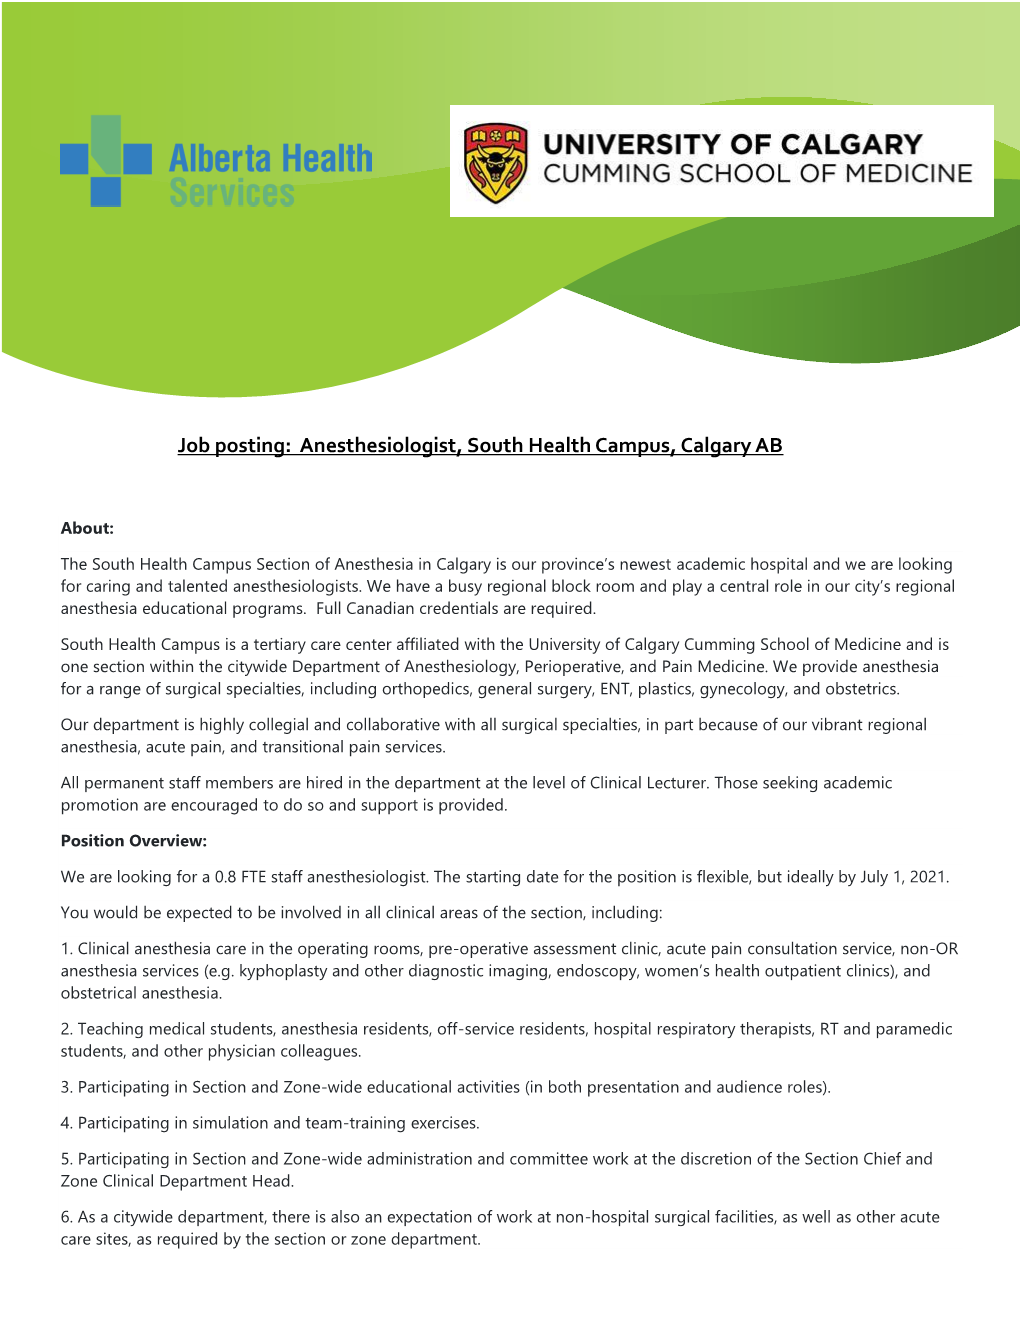 Job Posting: Anesthesiologist, South Health Campus, Calgary AB